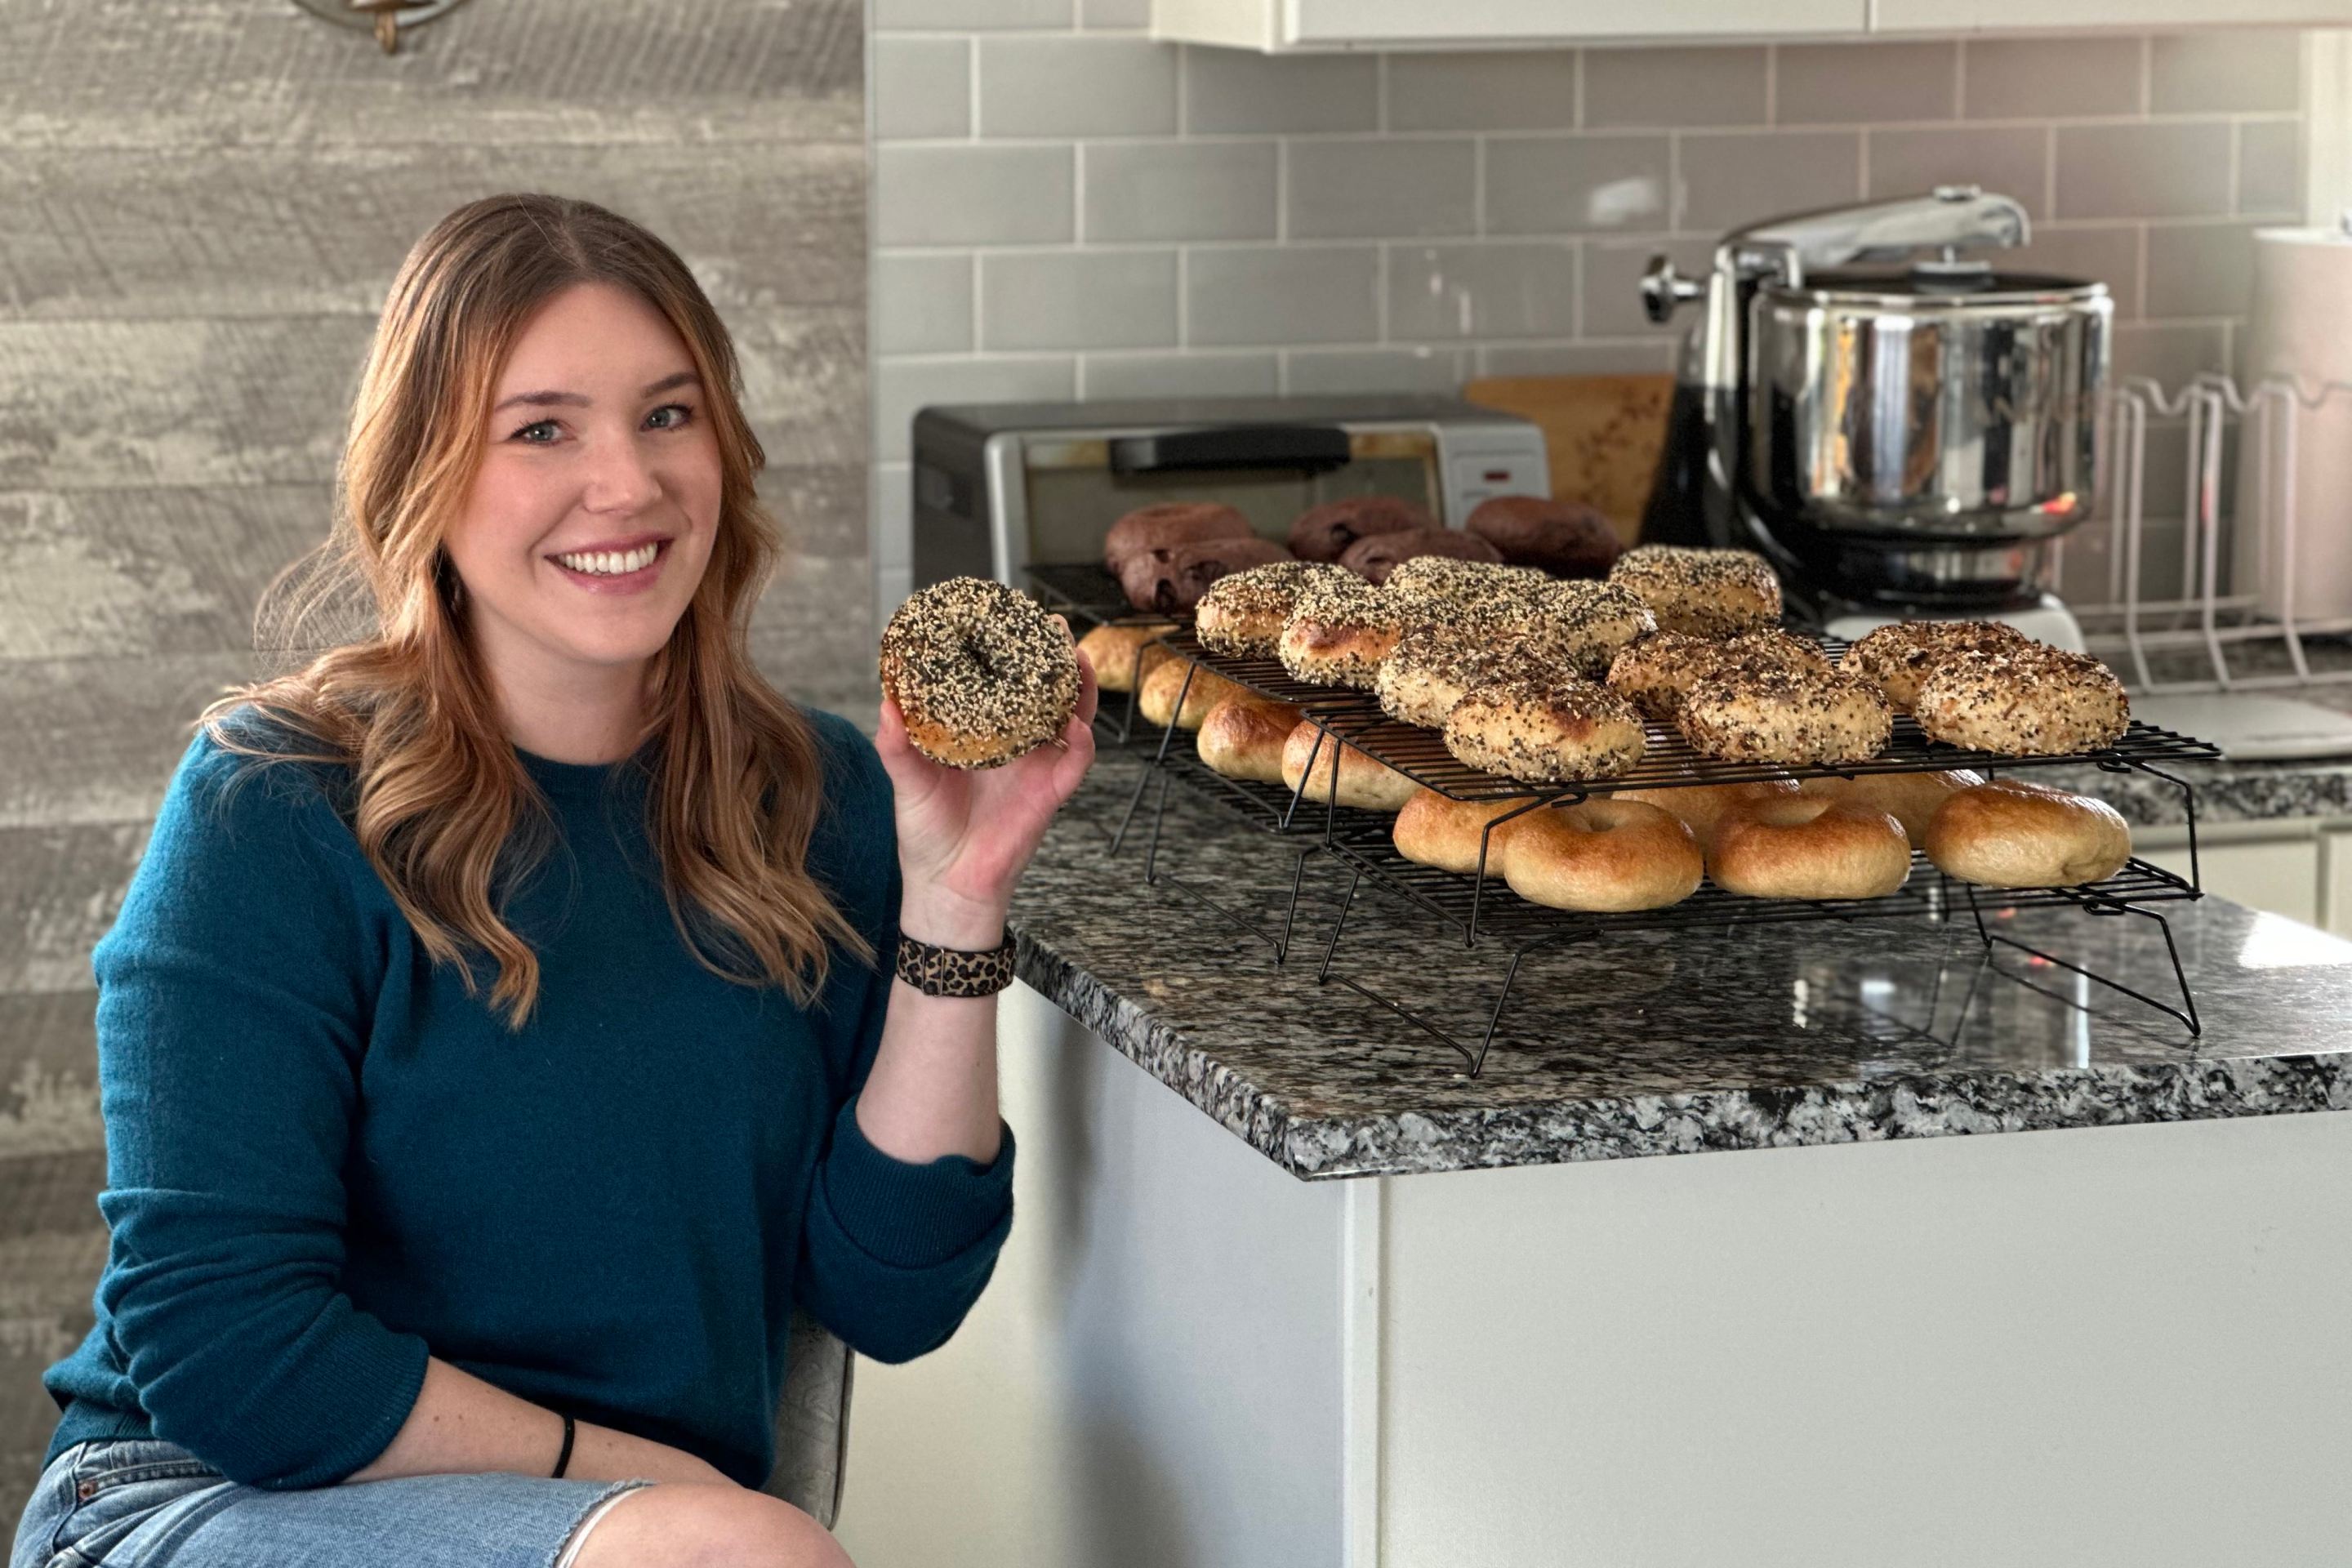 megan of mogi bagel holds an everything bagel while seated next to rows and rows of other bagels